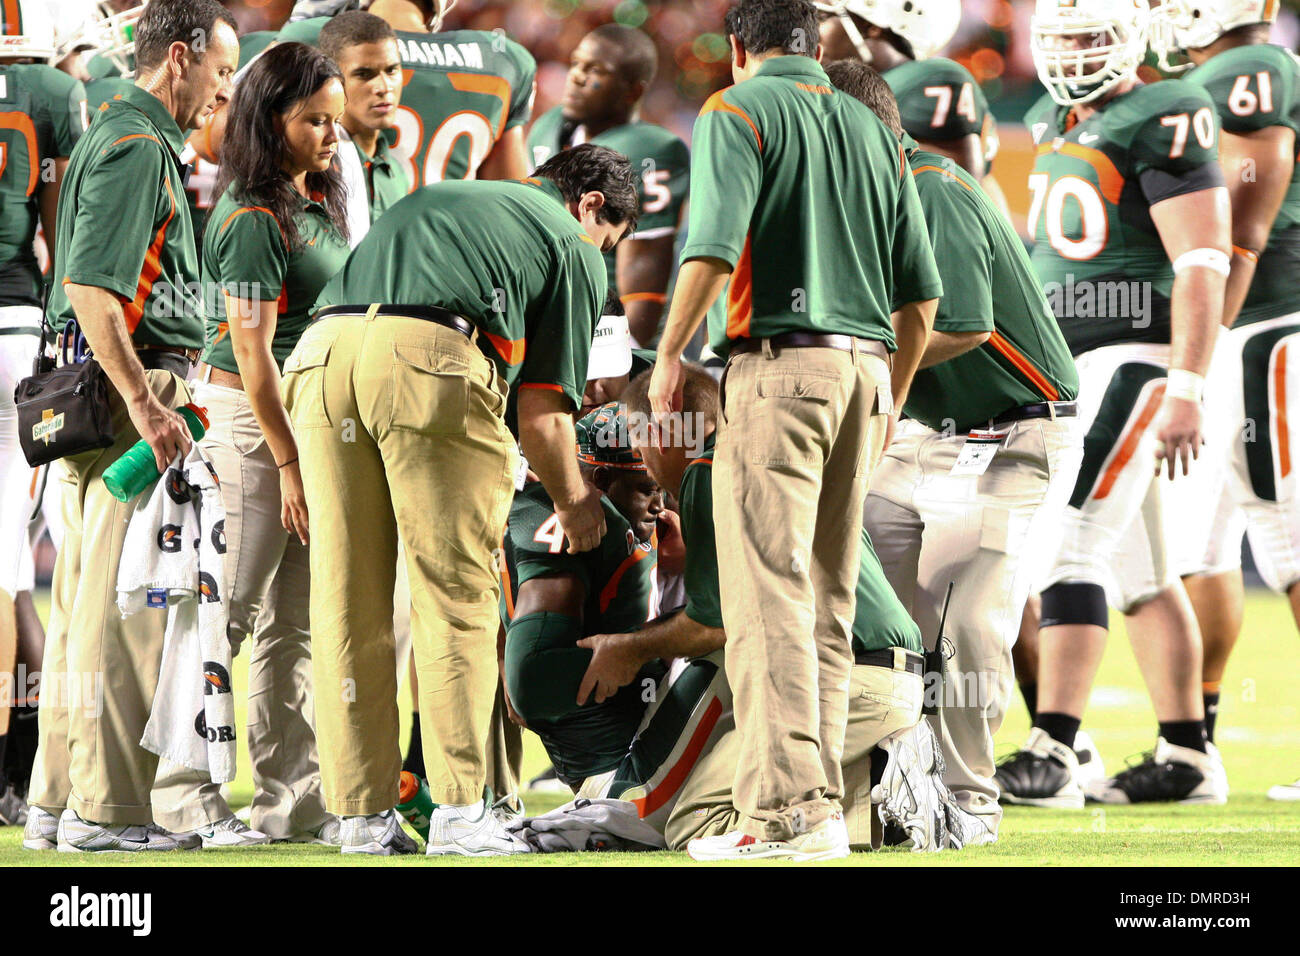 miami-fl-wide-receiver-aldarius-johnson-4-is-injured-on-the-play-the-DMRD3H.jpg